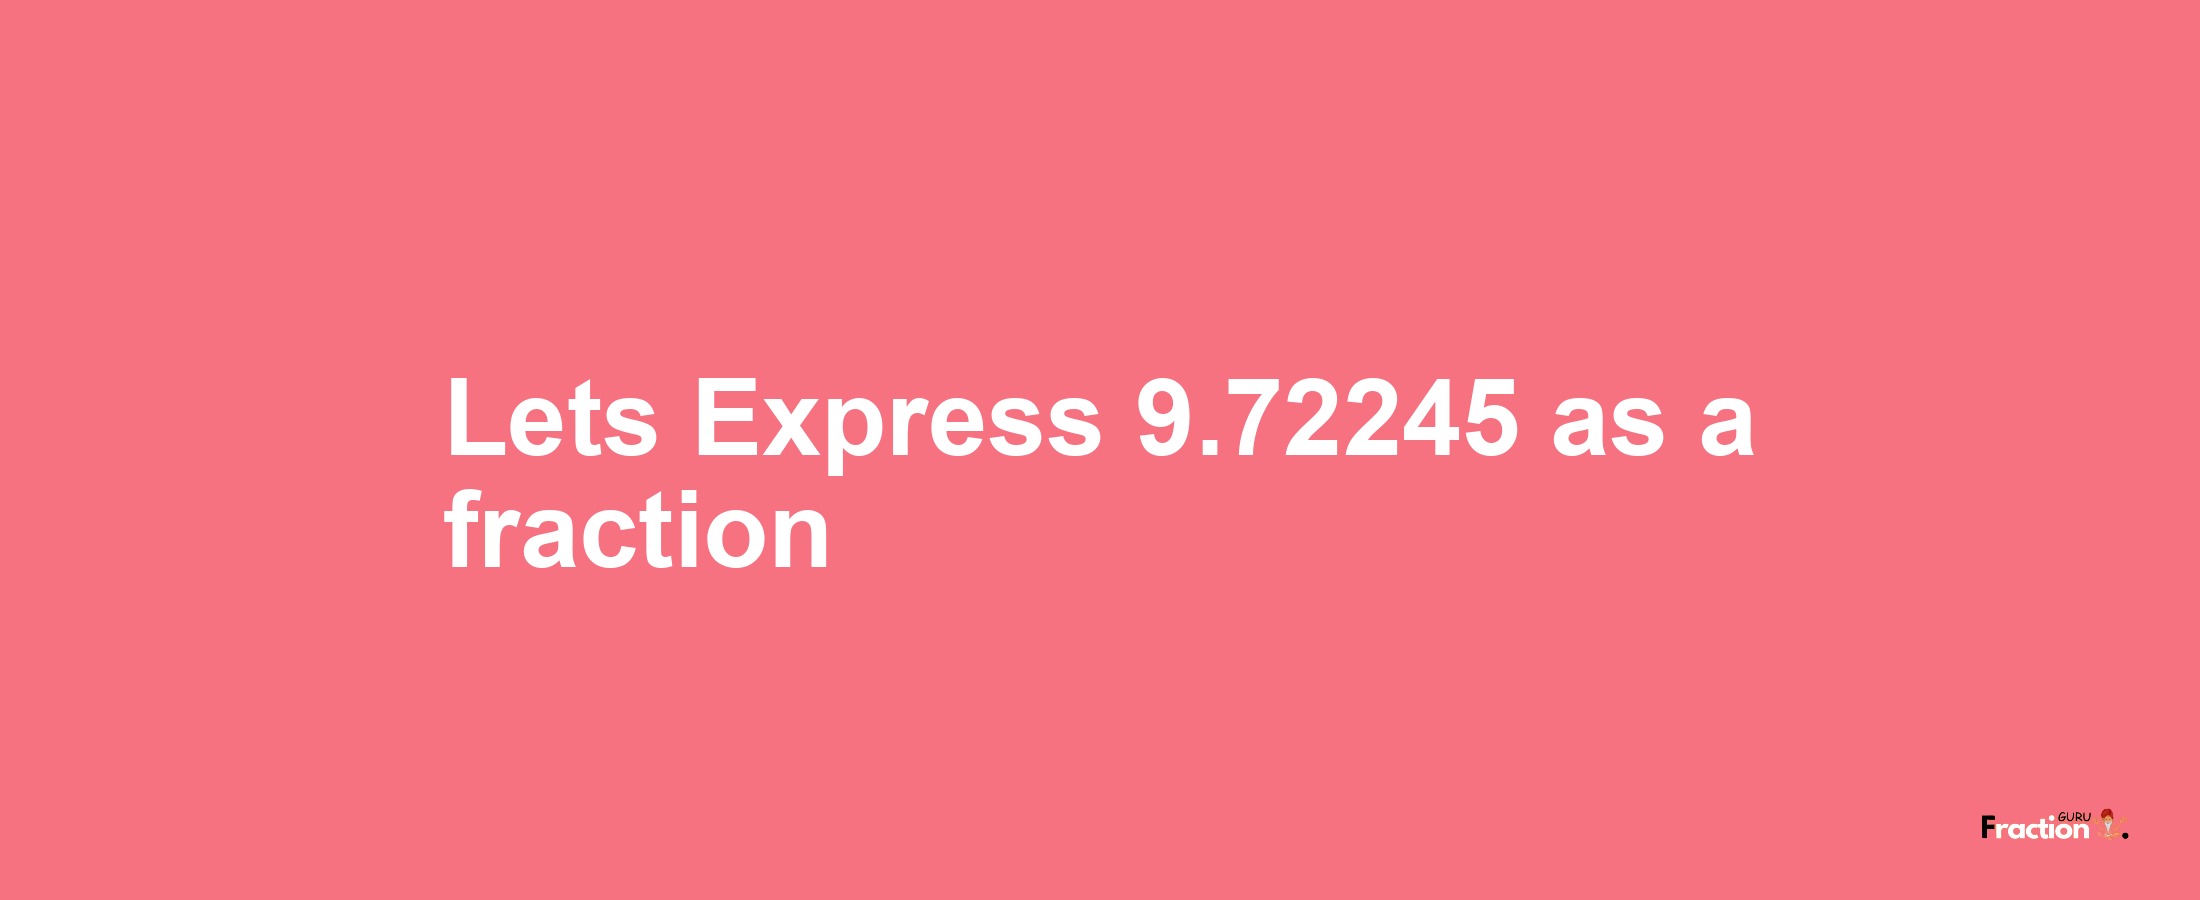 Lets Express 9.72245 as afraction